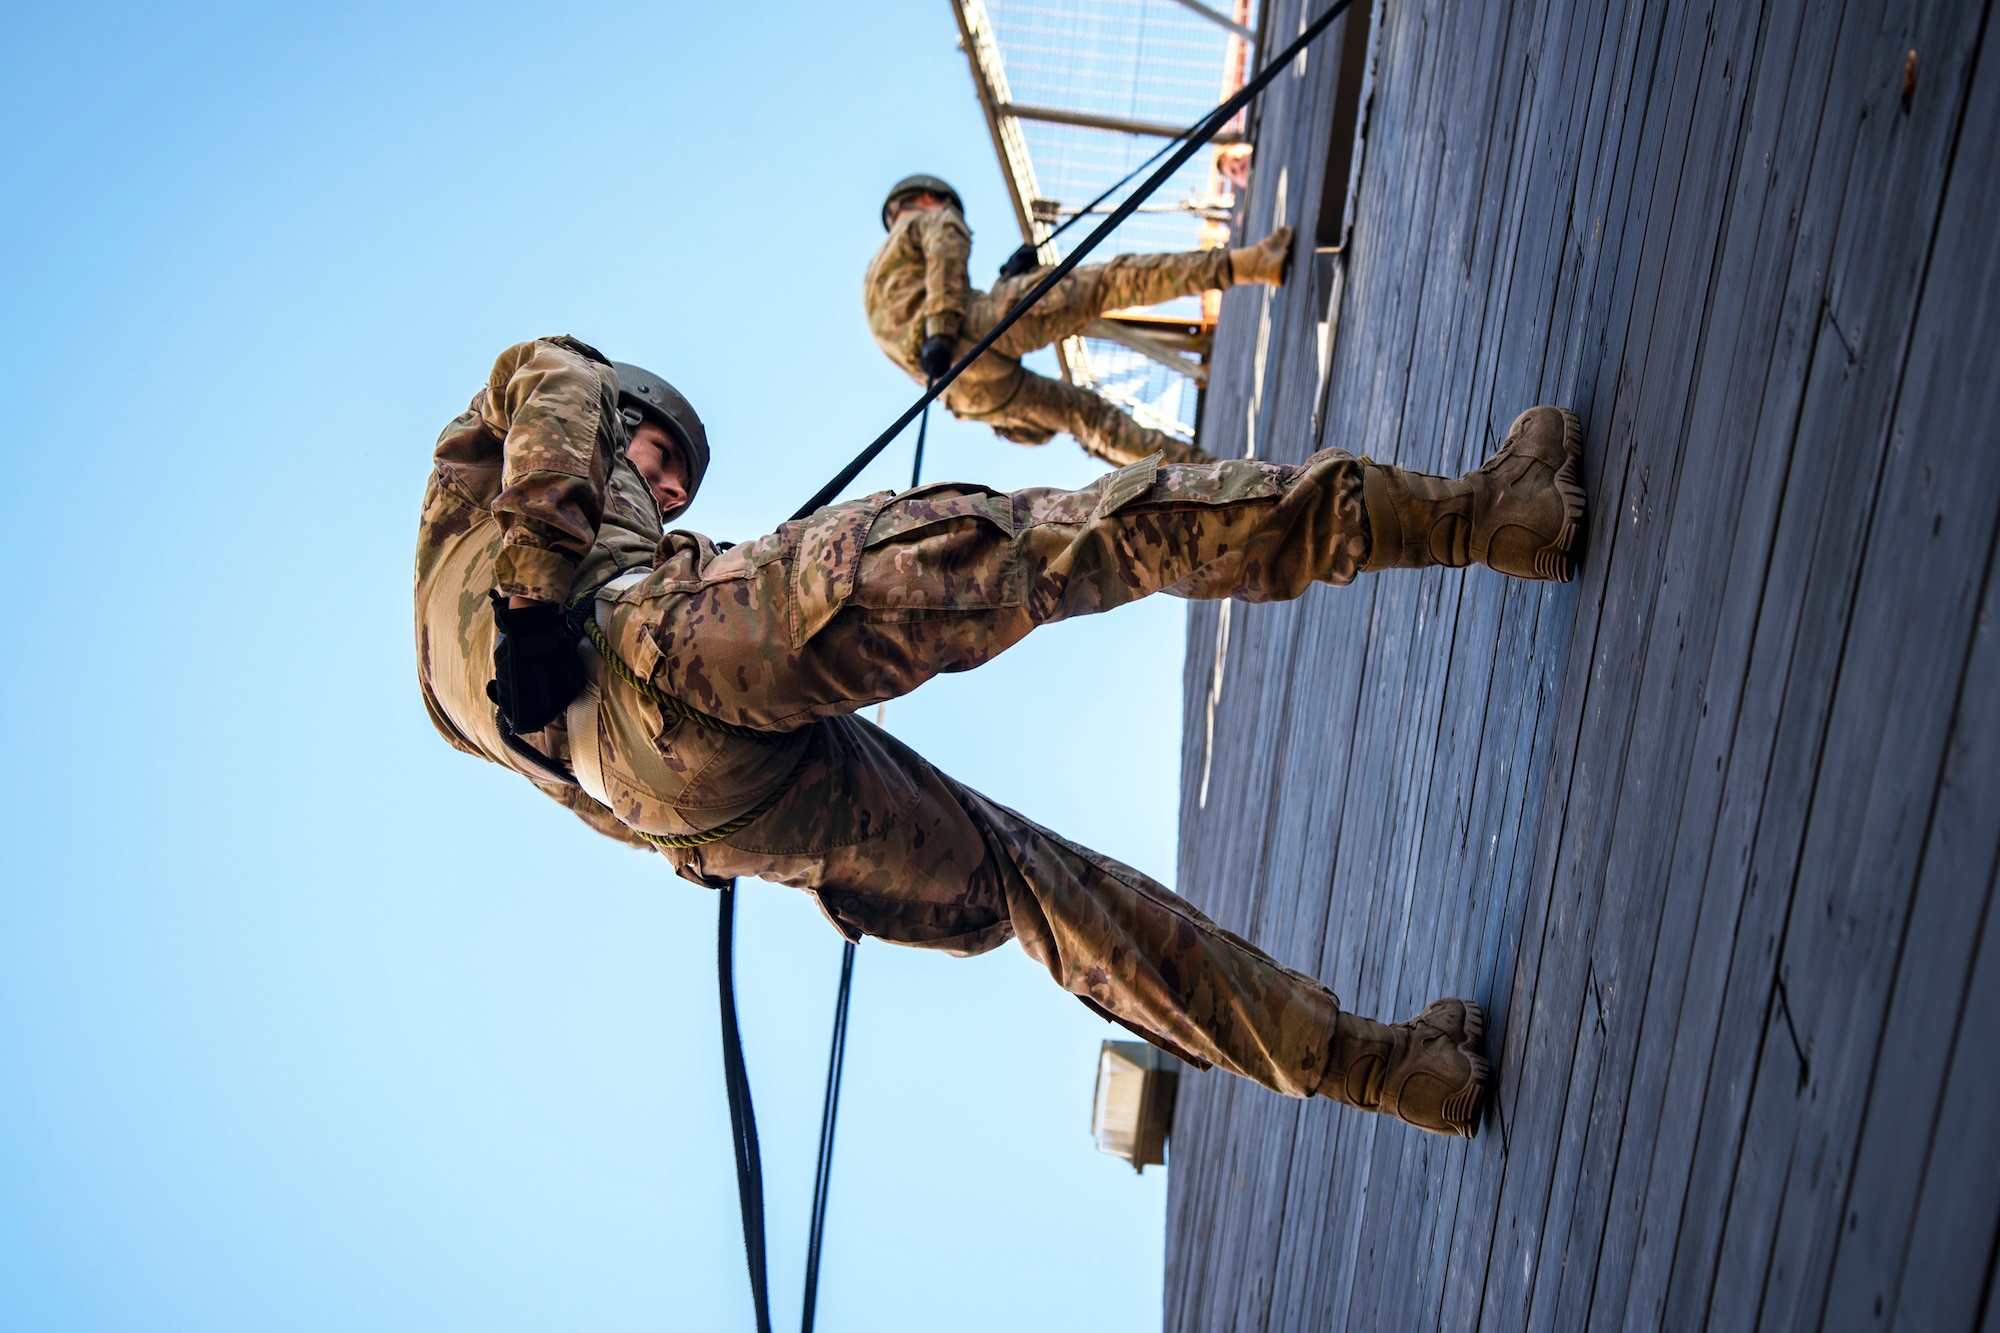 Airmen perform the brake technique prior to rappelling down the Safe Rappel Tower during an Army Air Assault Assessment, Jan. 28, 2019, at Moody Air Force Base, Ga. Airmen demonstrated their comprehensive rappel tower knowledge to help determine their overall readiness for Army Air Assault school (U.S. Air Force photo by Airman First Class Eugene Oliver)